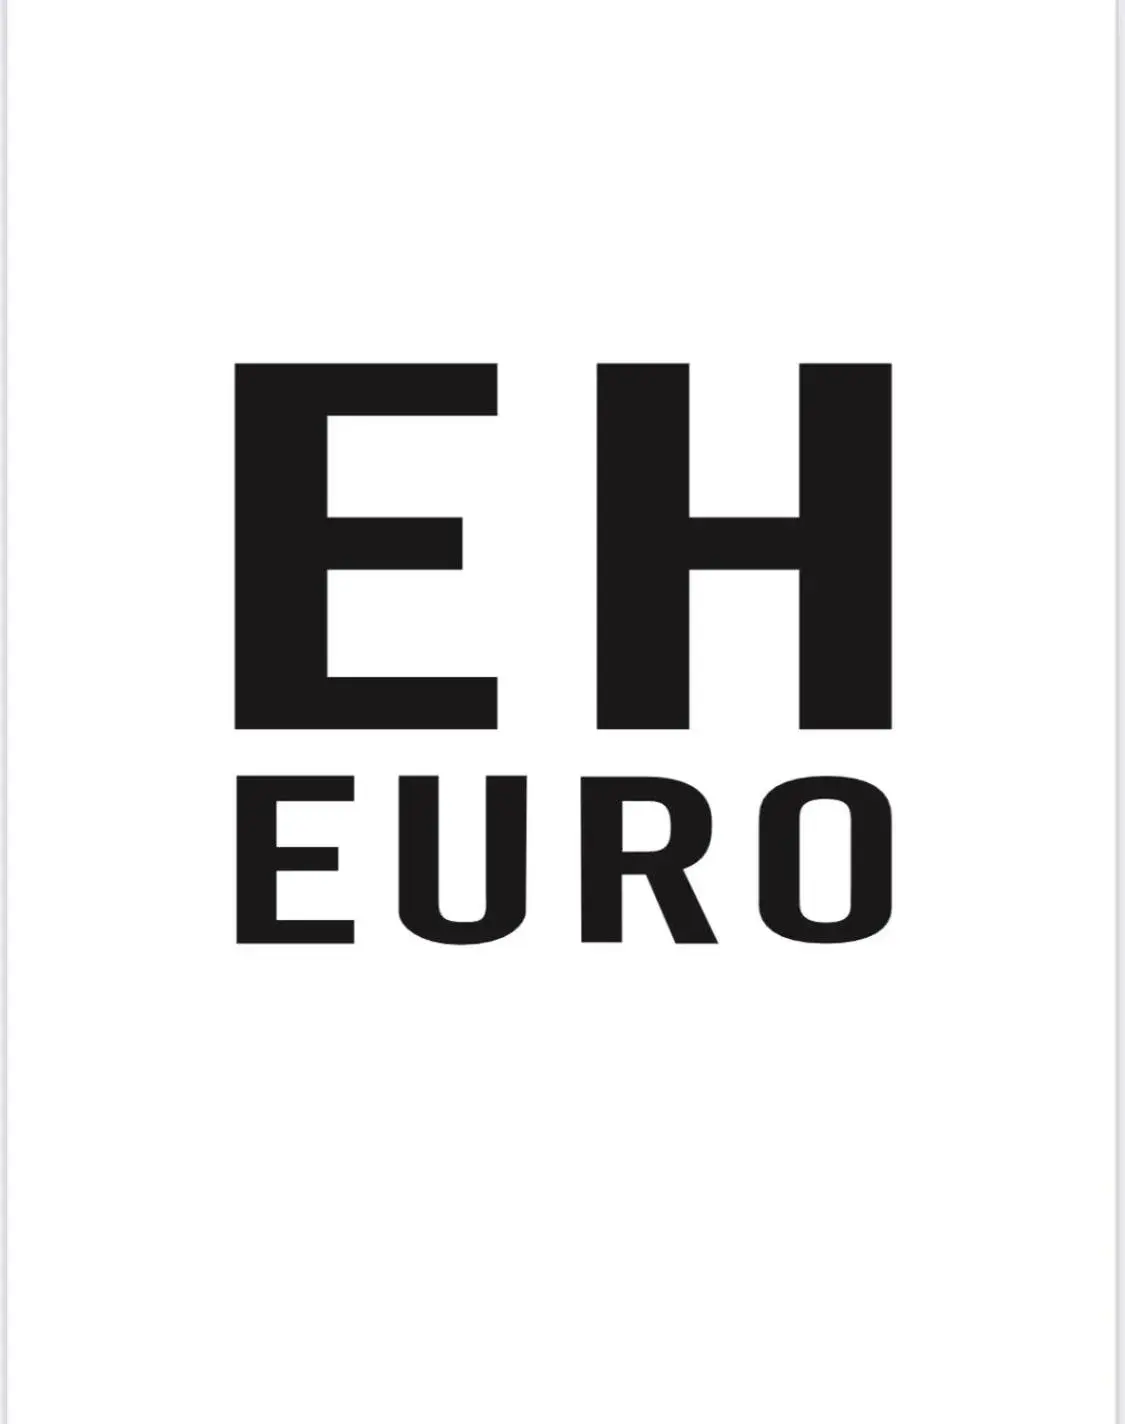 Property logo or sign in Euro Hotel